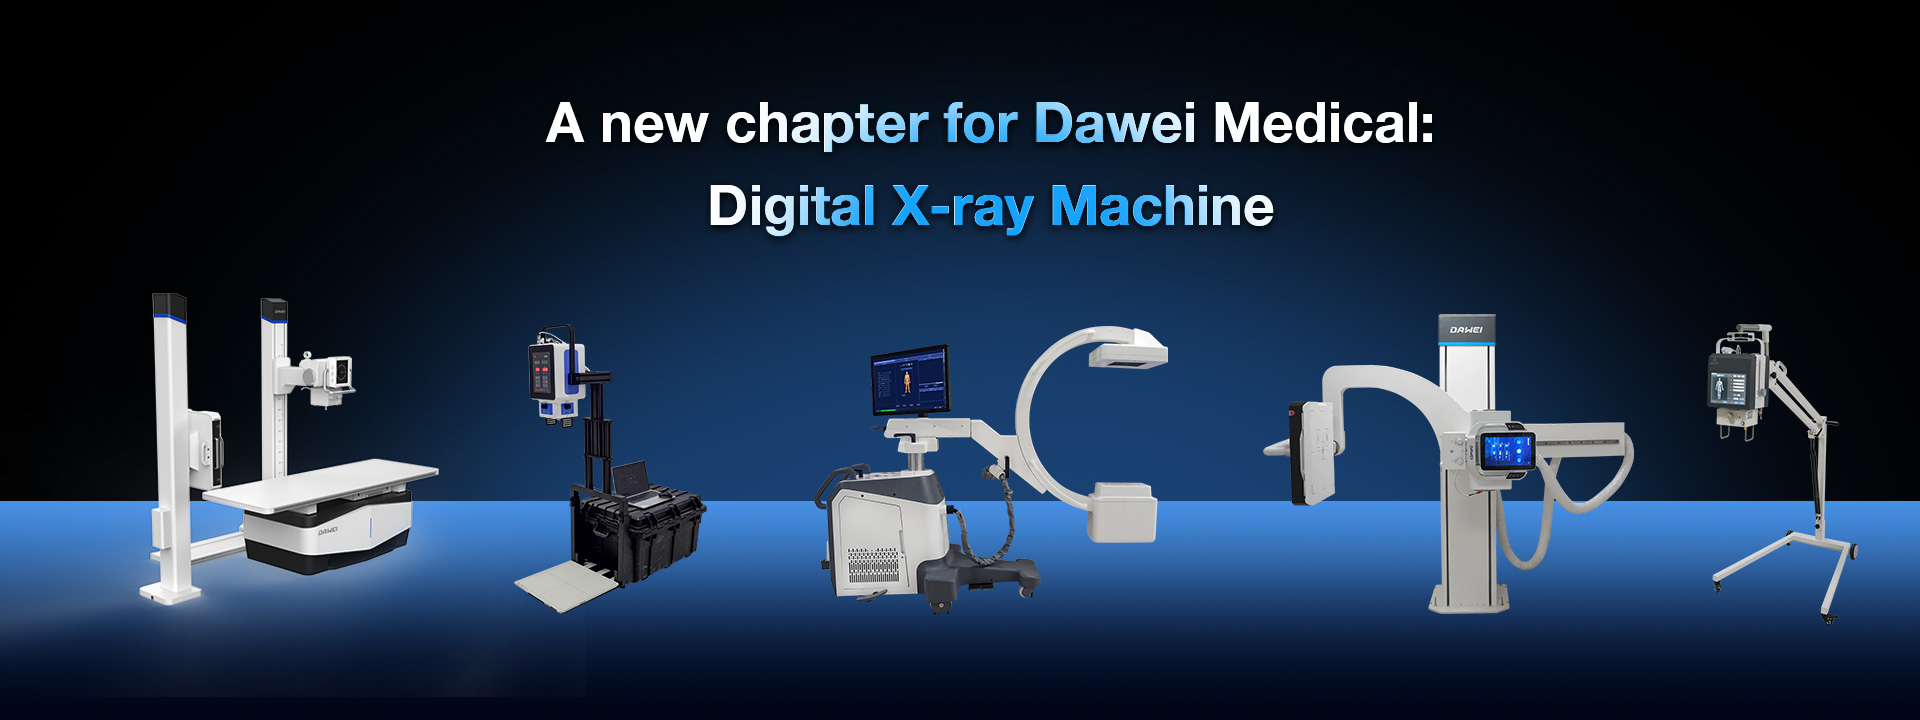 A new chapter for Dawei Medical: Digital X-ray Machine